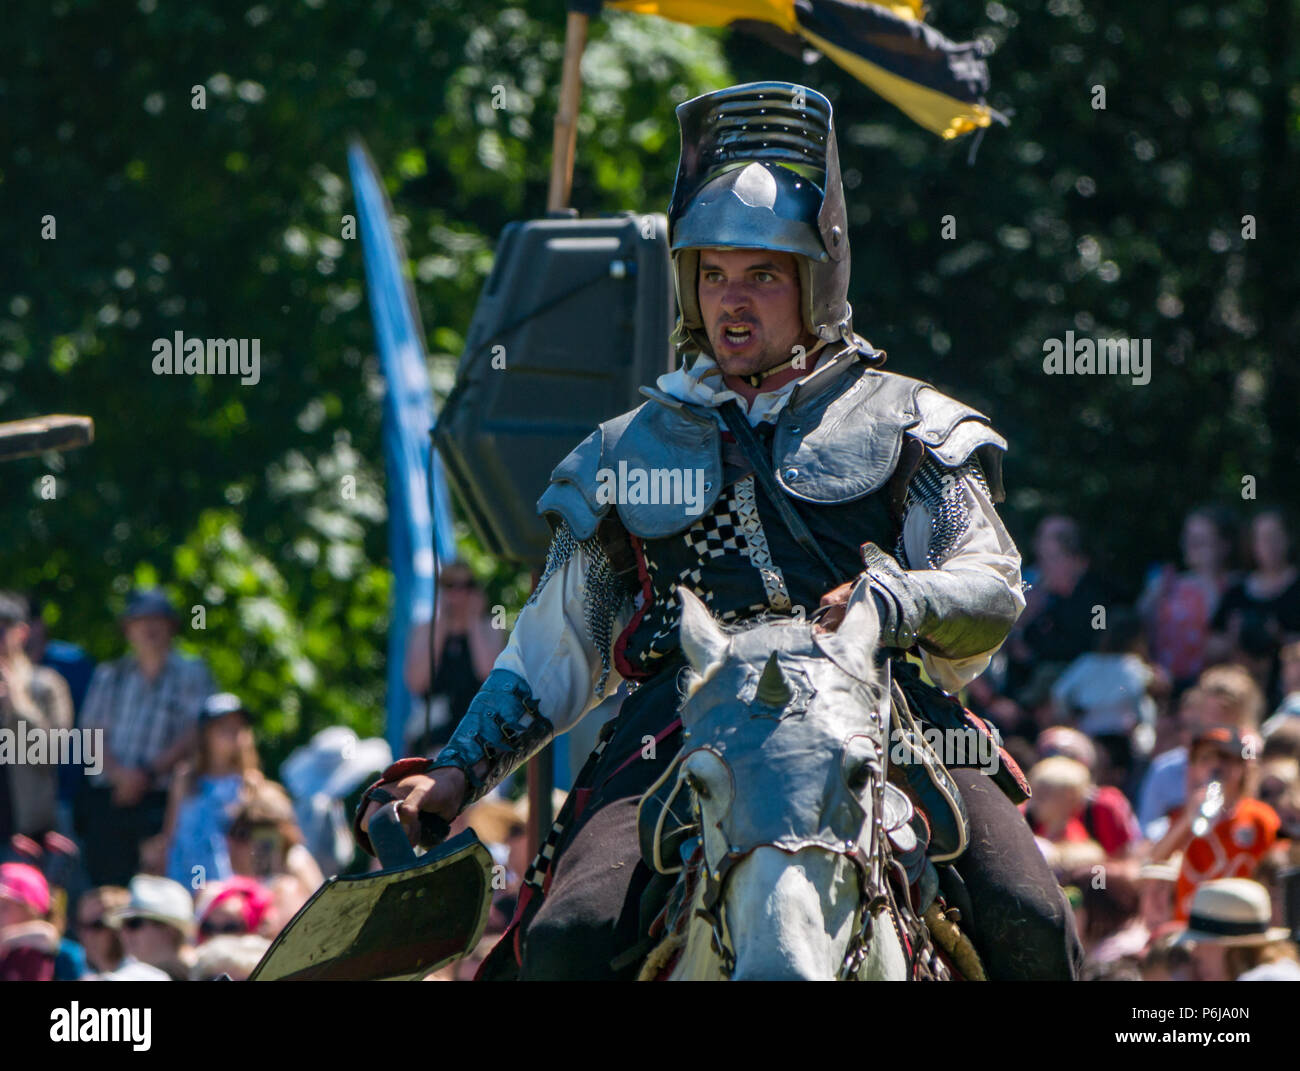 Jousting and Medieval Fair at Linlithgow Palace, Linlithgow, Scotland, United Kingdom, 30th June 2018. Historic Environment Scotland kick off their summer entertainment programme with a fabulous display of Medieval jousting in the grounds of the historic castle. The jousting is performed by Les Amis D'Onno equine stunt team with a knight in armour on a horse Stock Photo